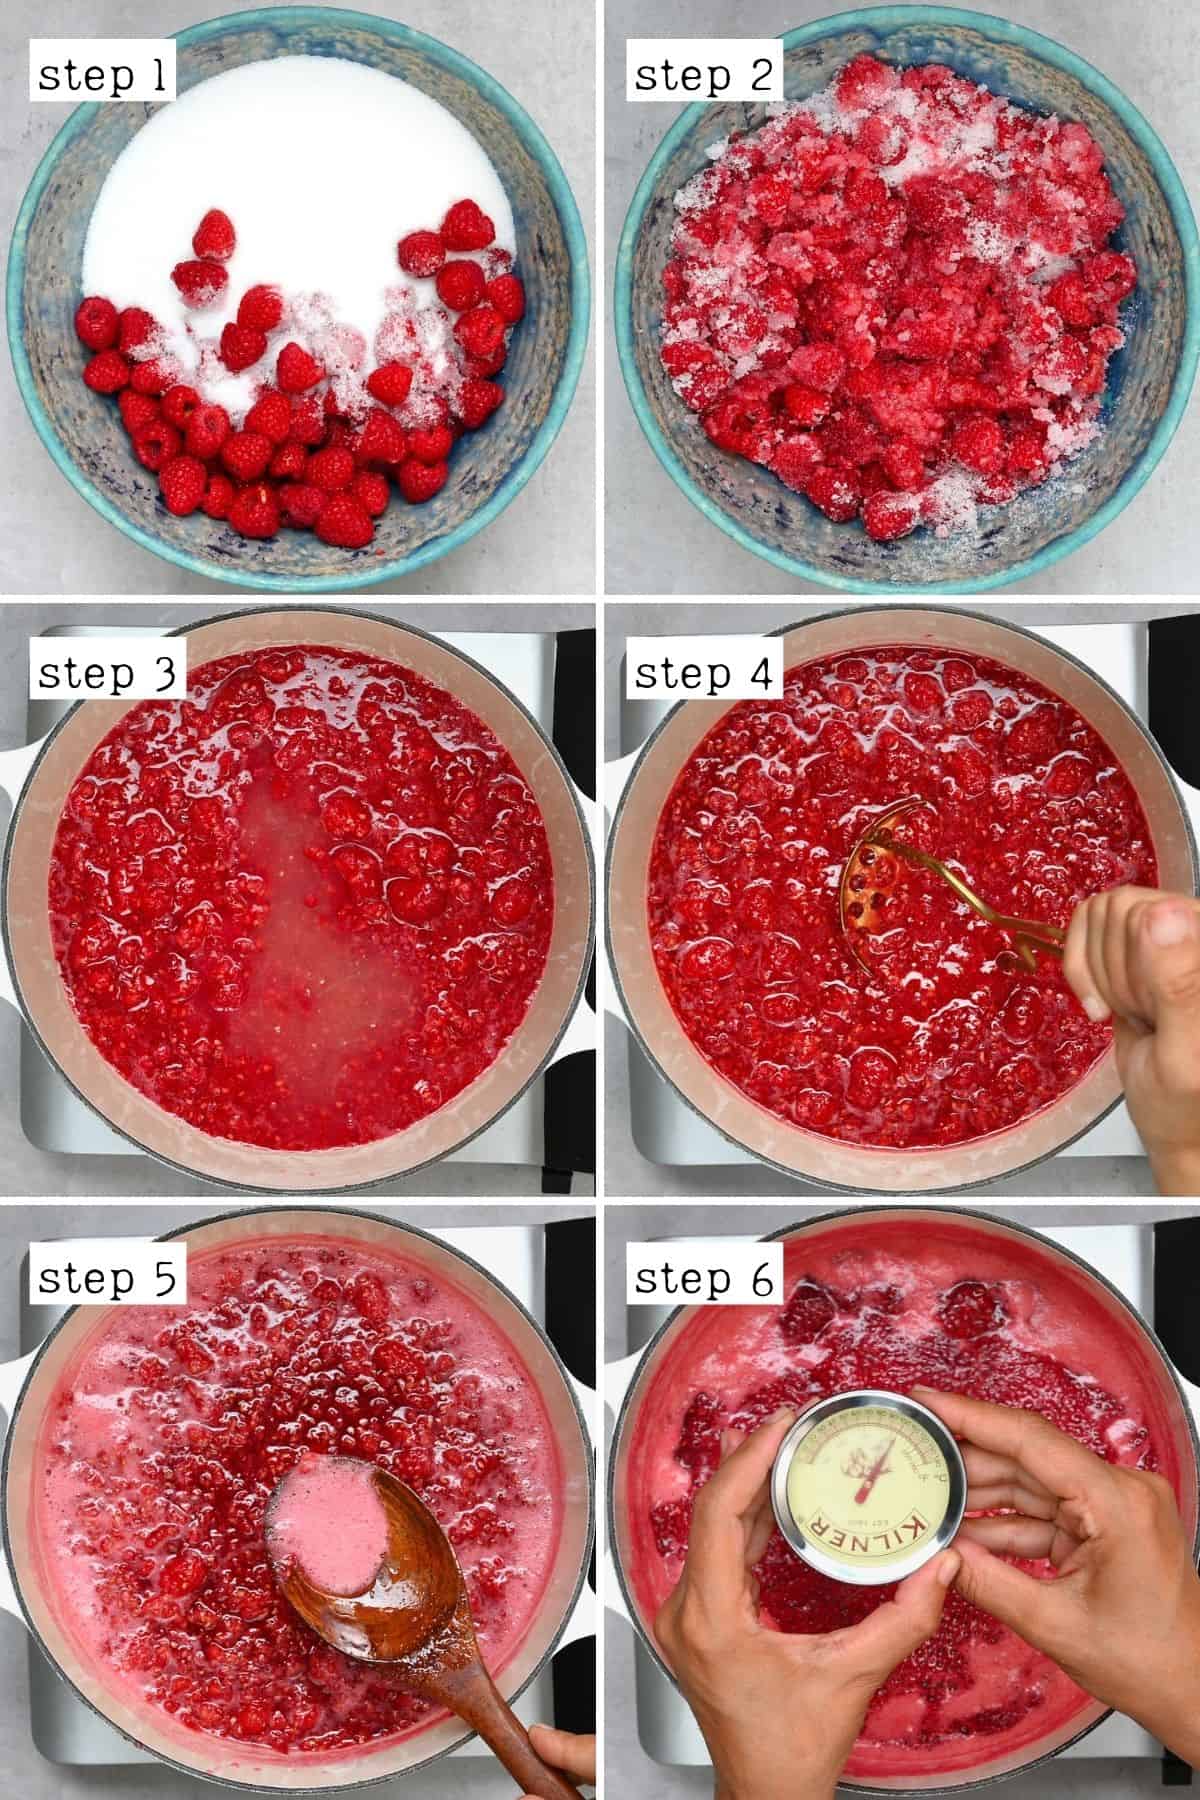 Raspberry Jam - It's Not Complicated Recipes